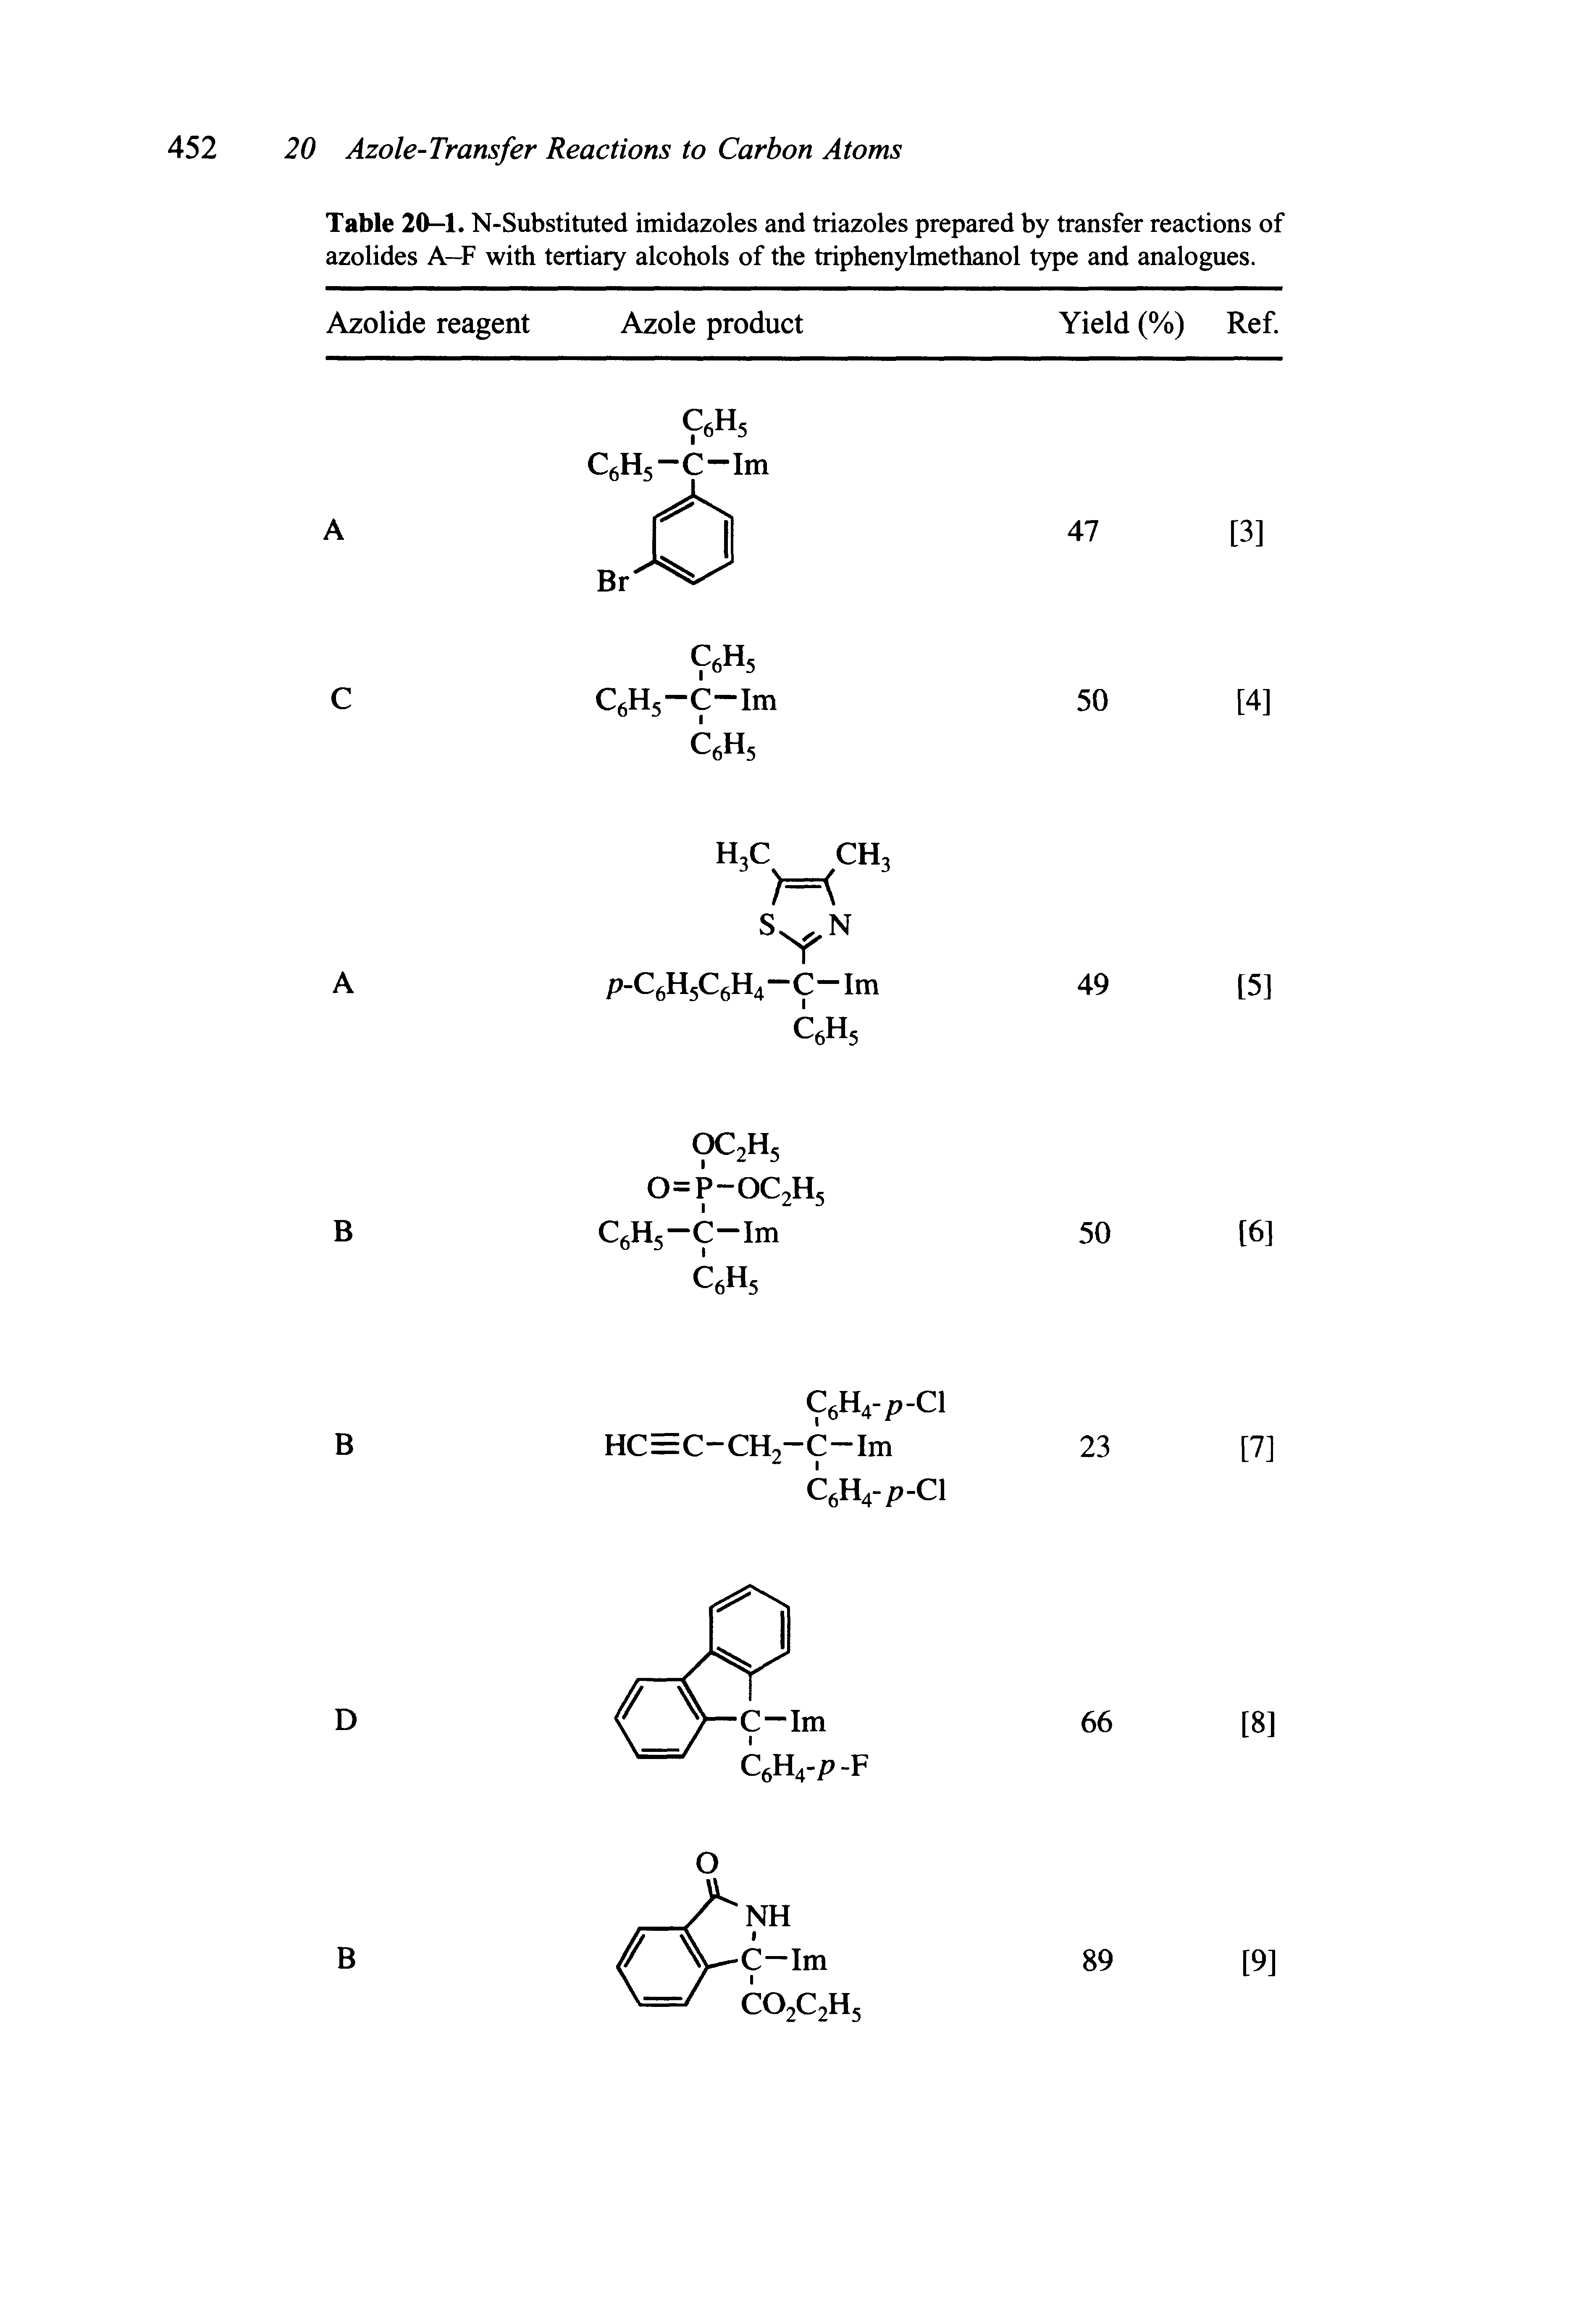 Table 20-1. N-Substituted imidazoles and triazoles prepared by transfer reactions of azolides A—F with tertiary alcohols of the triphenylmethanol type and analogues.